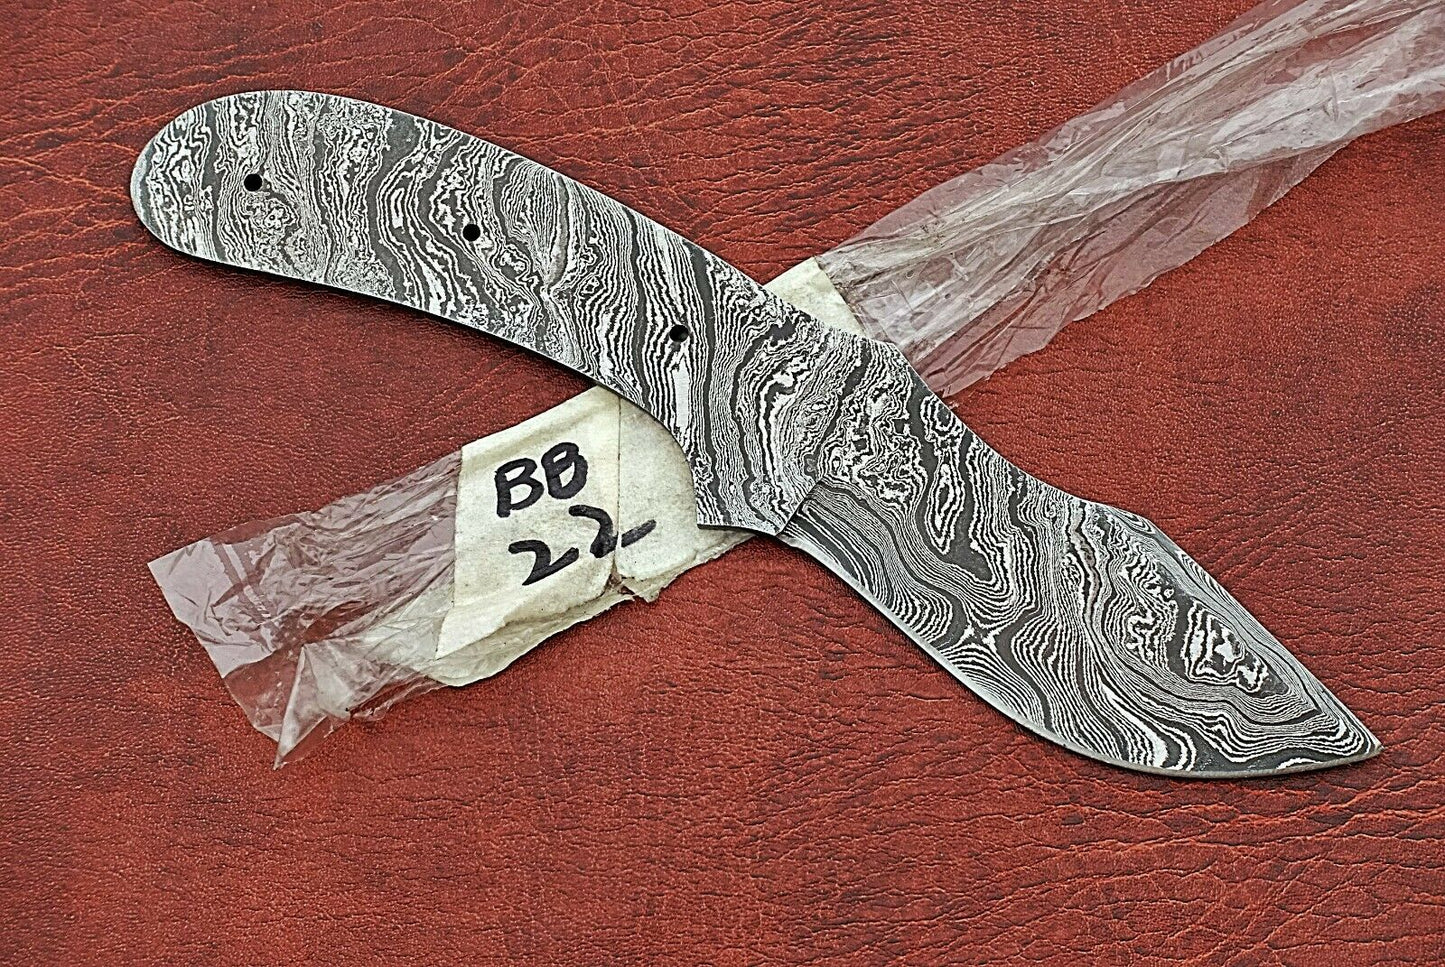 Clip point blank blade 8" hand forged Damascus steel knife, 3.5" Cutting edge